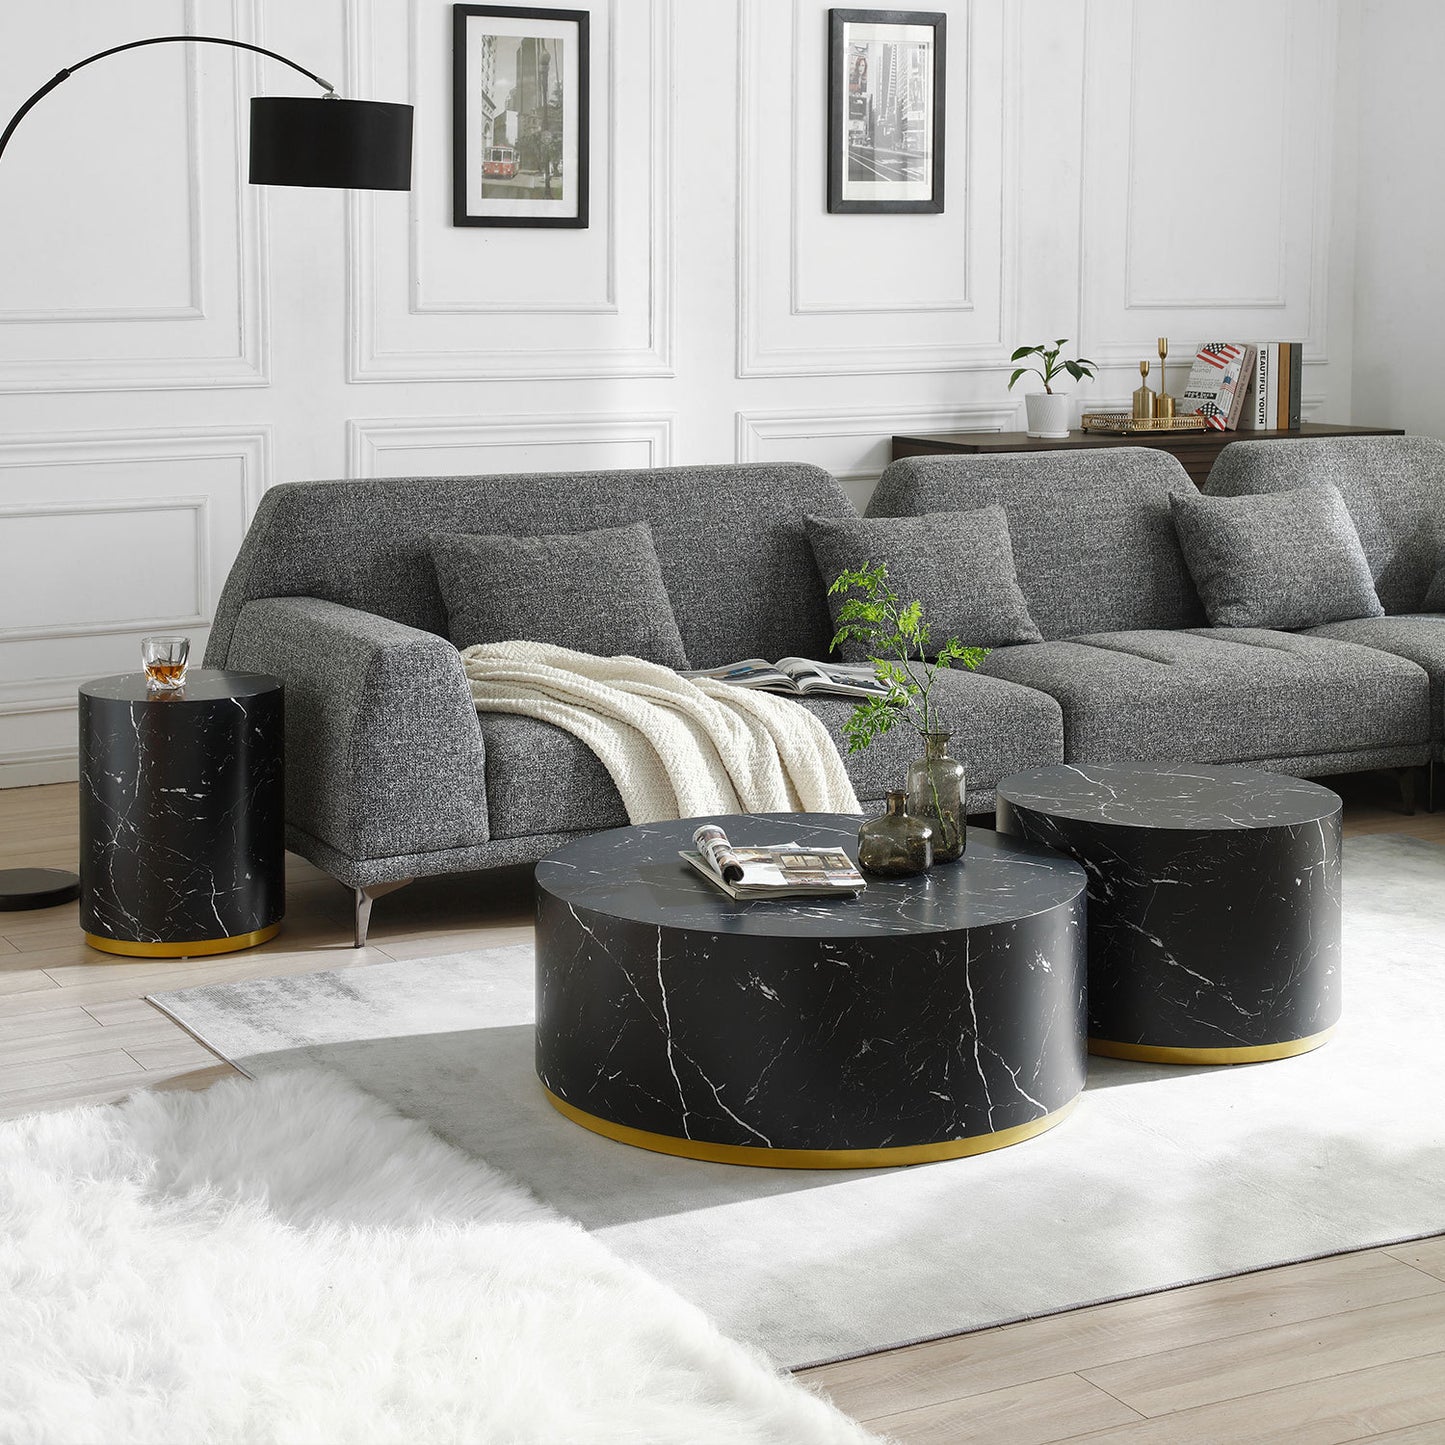 Modern Faux Marble Coffee Tables: 35.43inch Accent Tea Tables with Gold Metal Base in Black Color